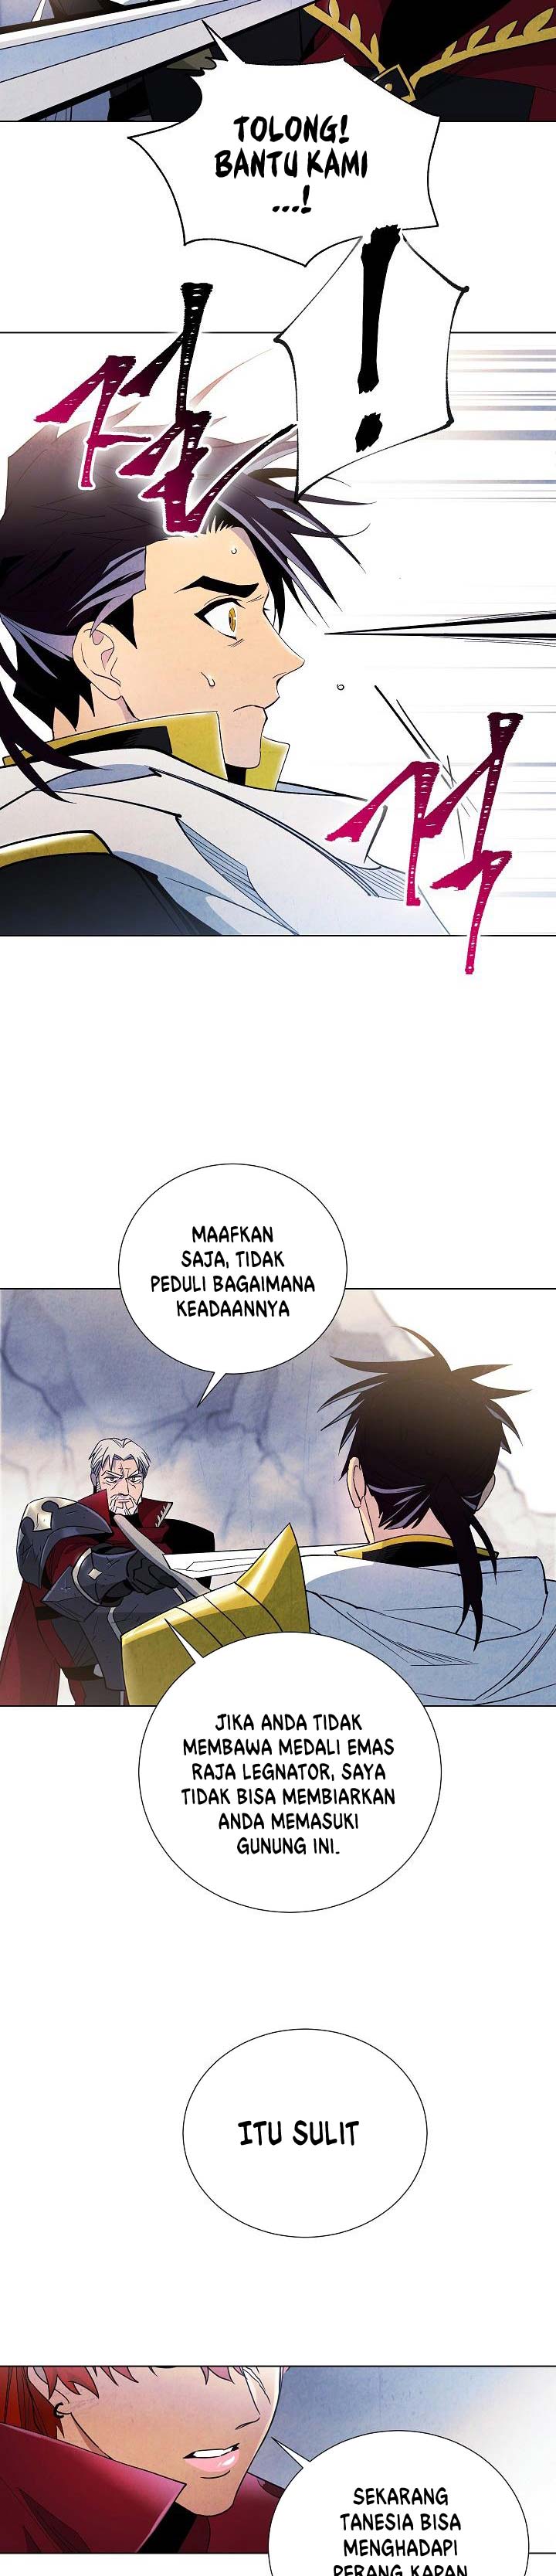 Seven Knights: Alkaid Chapter 6